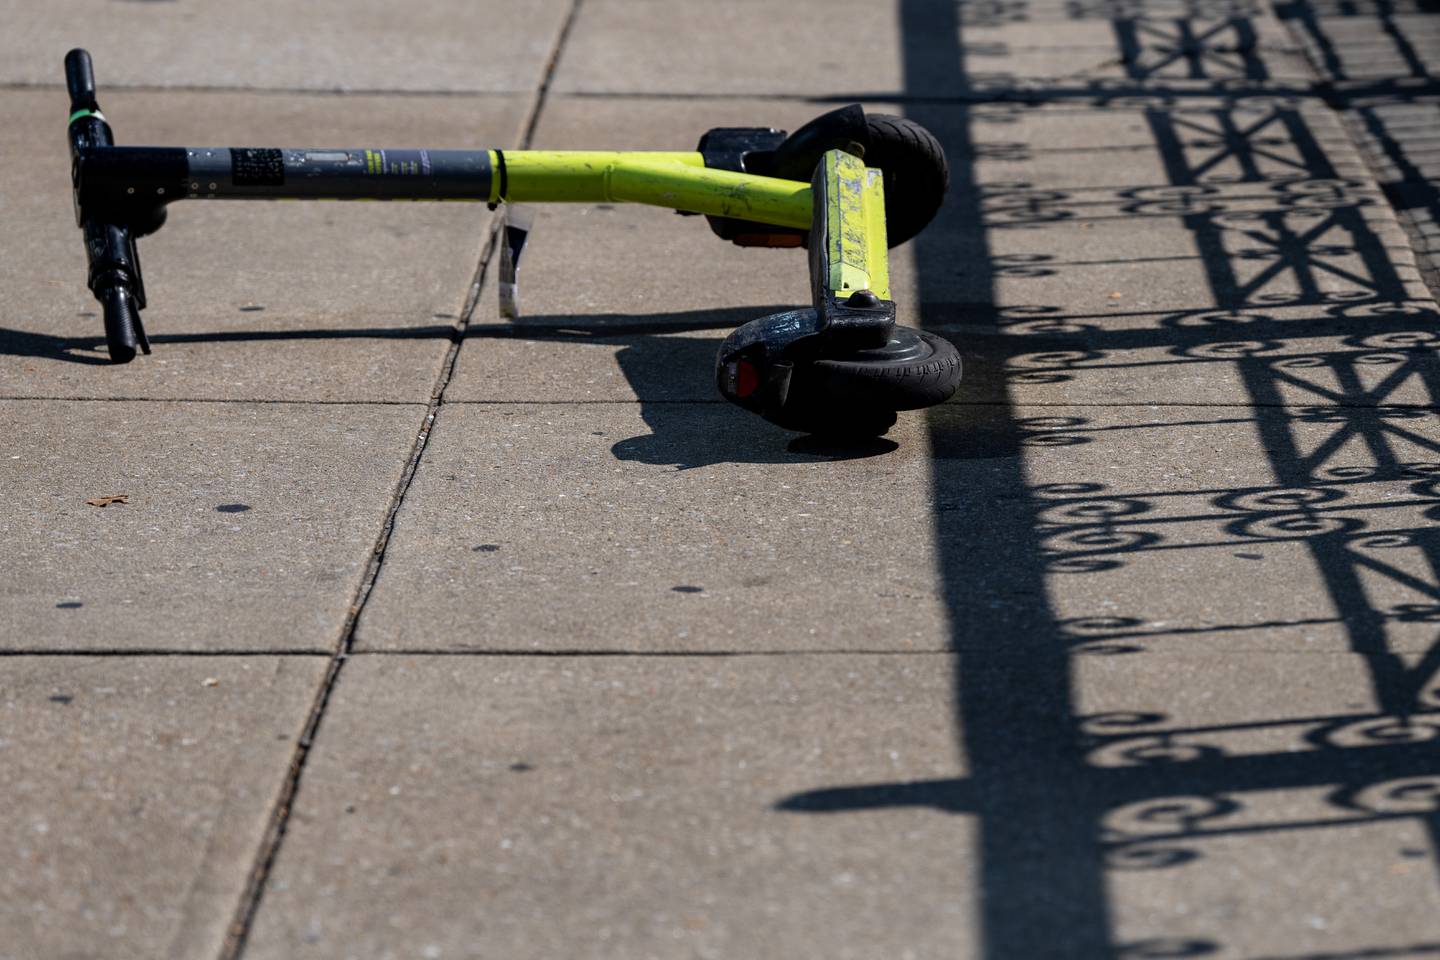 A green scooter lies on the sidewalk on the left side of the frame, as a decorative fence casts a shadow on the right side.